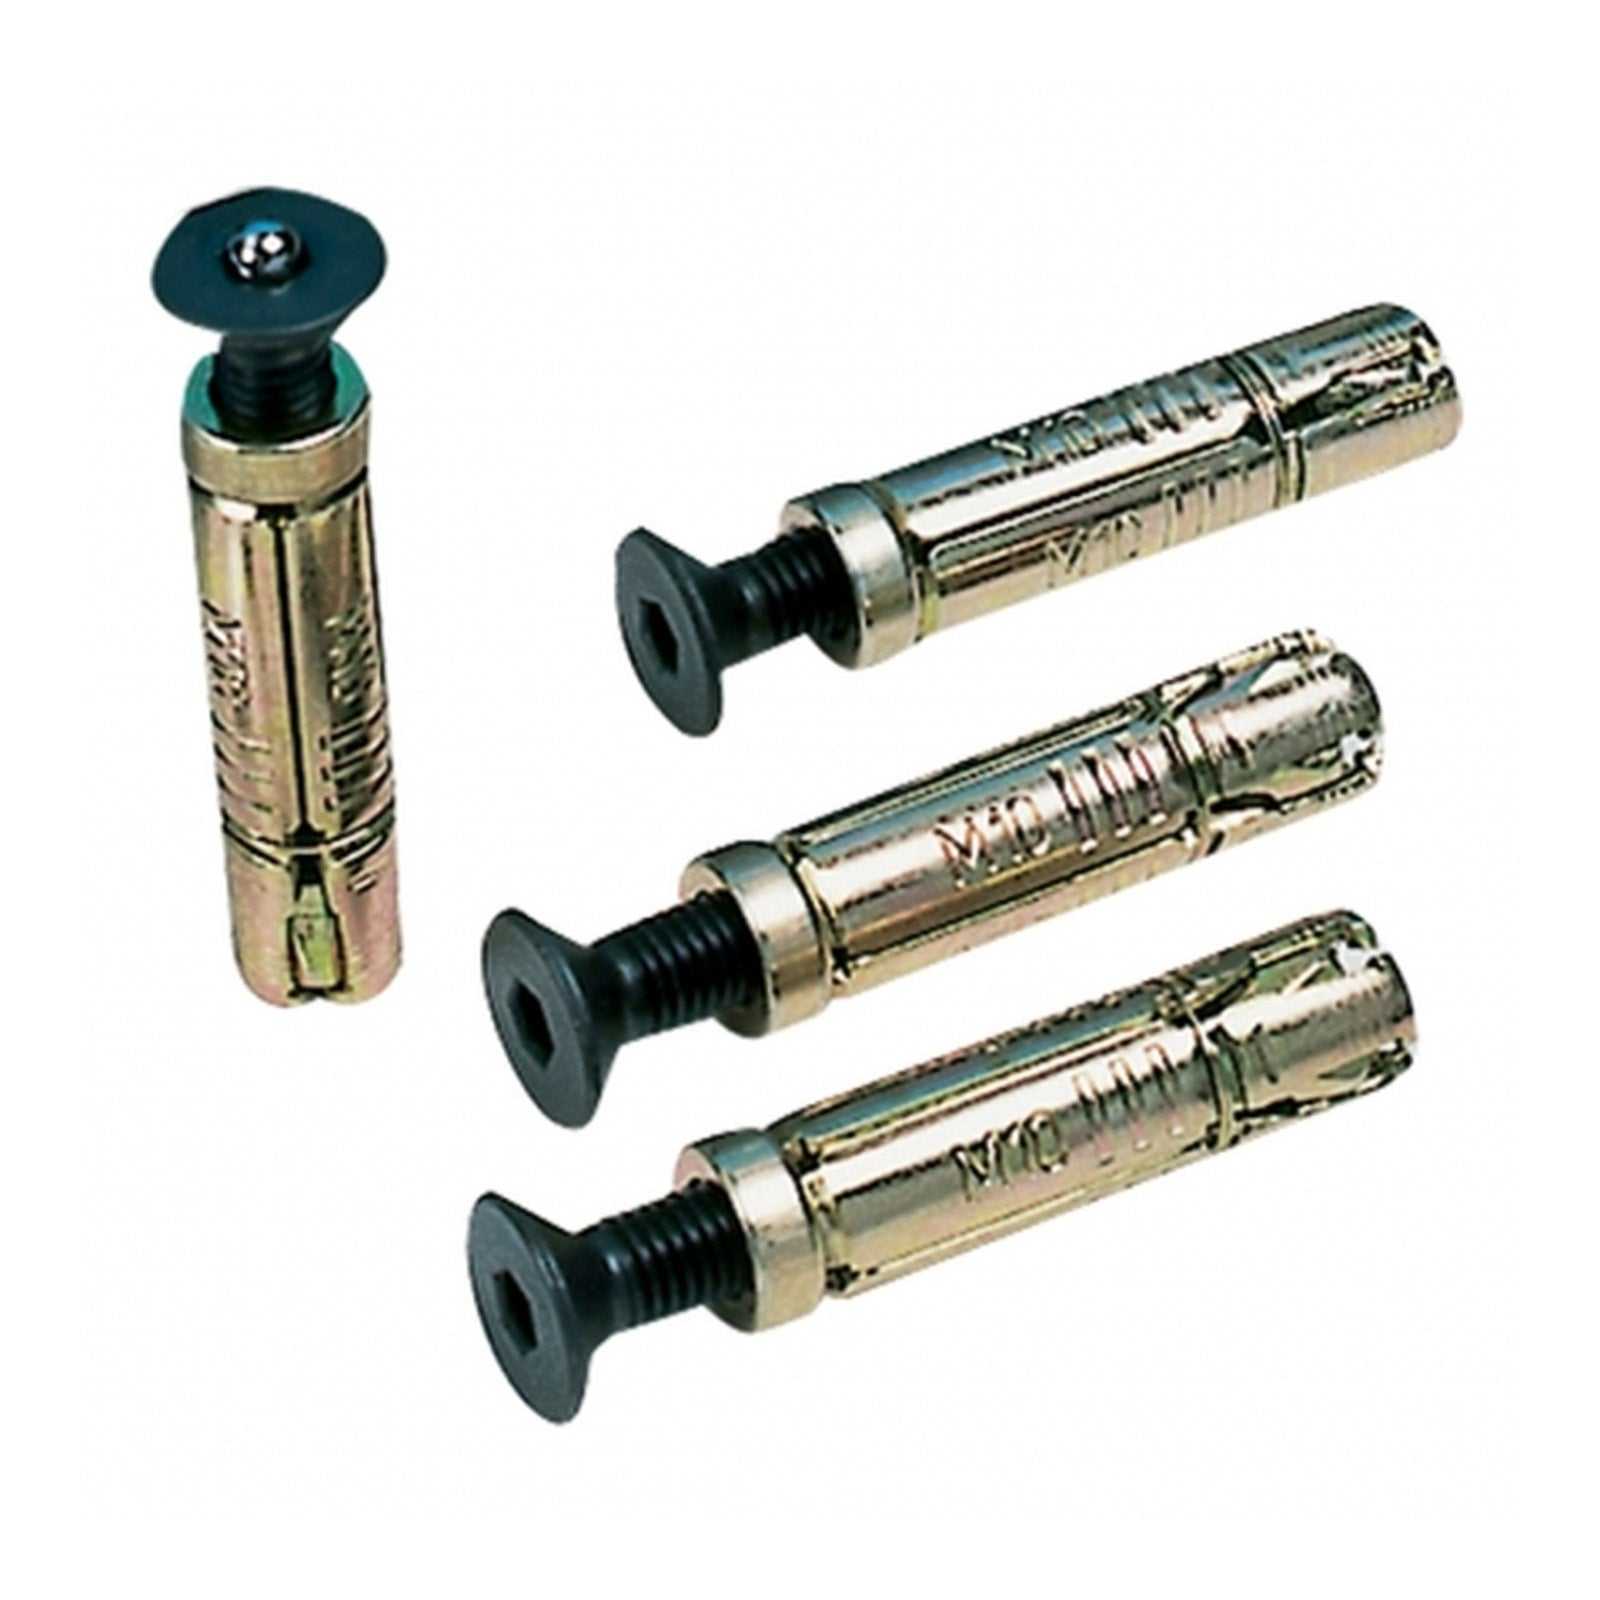 Oxford, Oxford Ground Anchor Replacement Bolts - RotaForce (4 Pack)